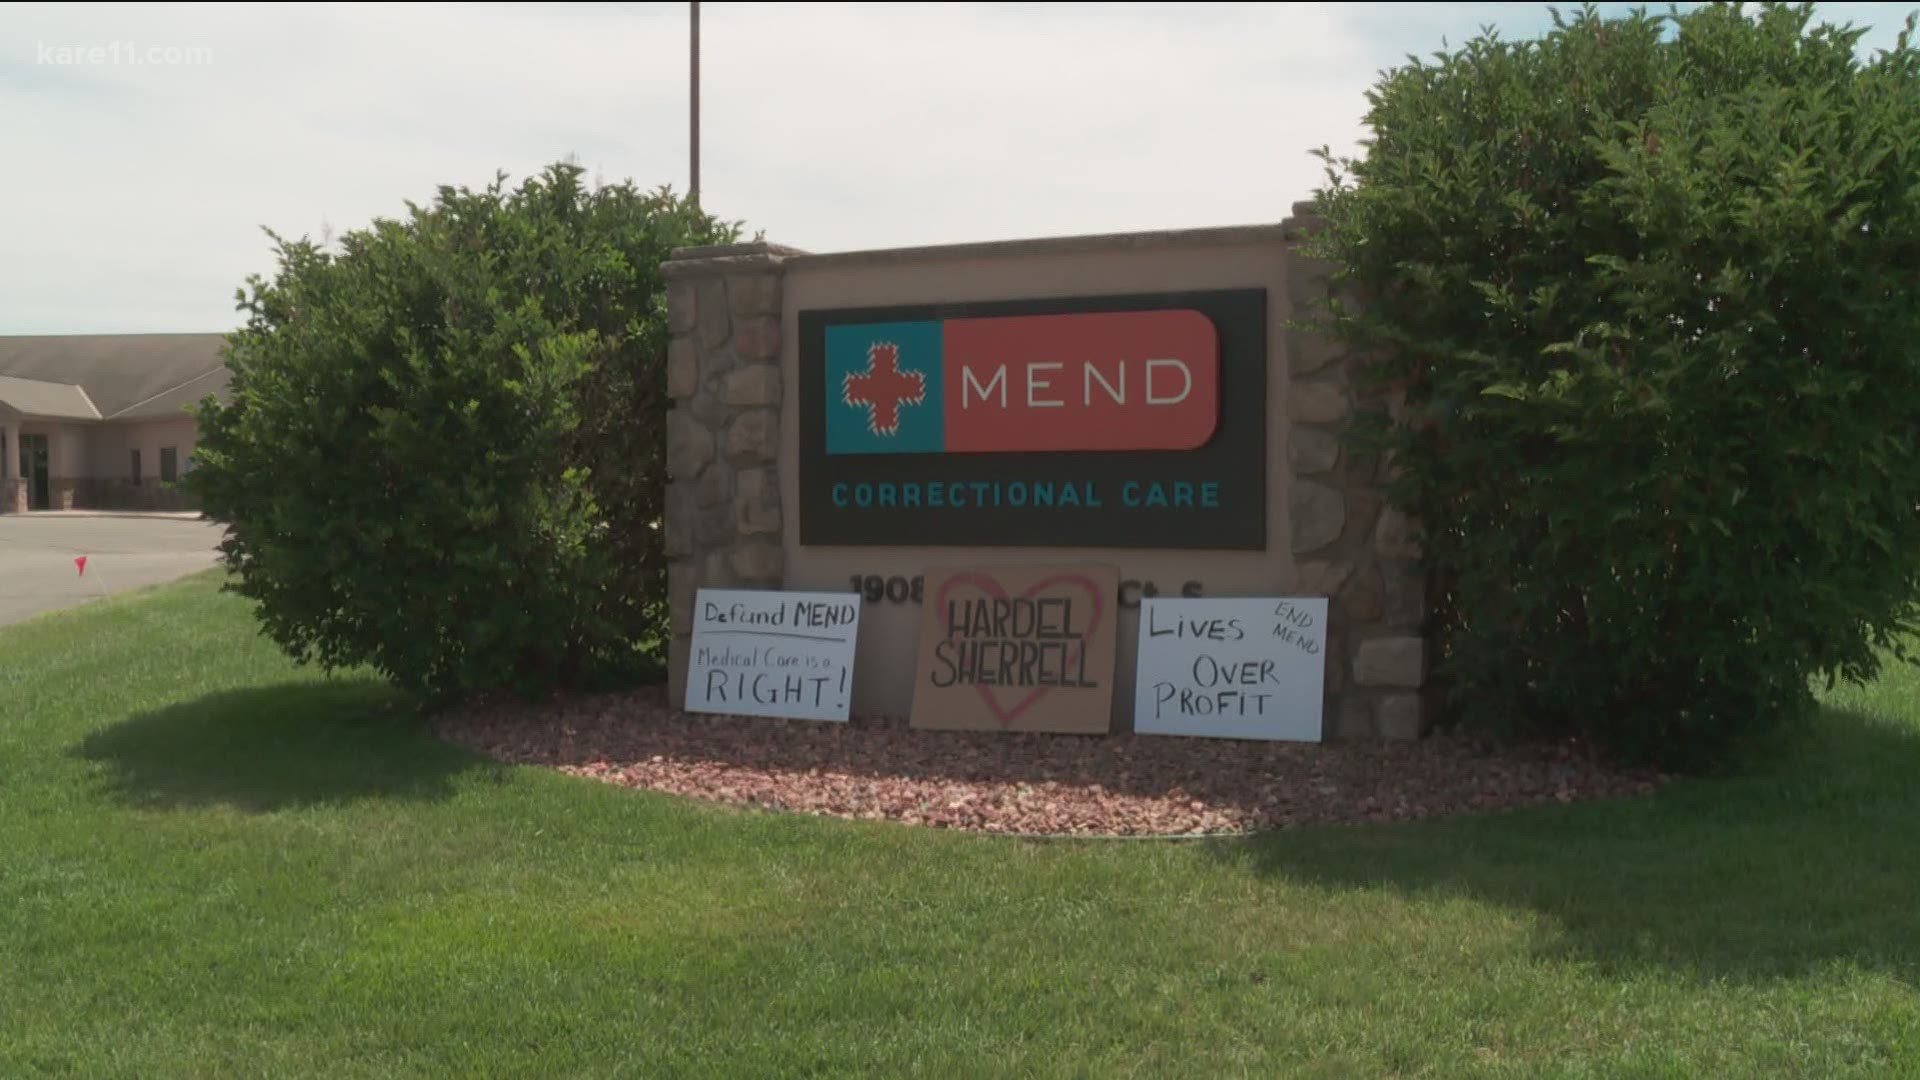 Led by a doctor reprimanded by the state medical board, KARE 11 investigation finds MEnD Correctional Care now faces multiple federal lawsuits over inmate deaths